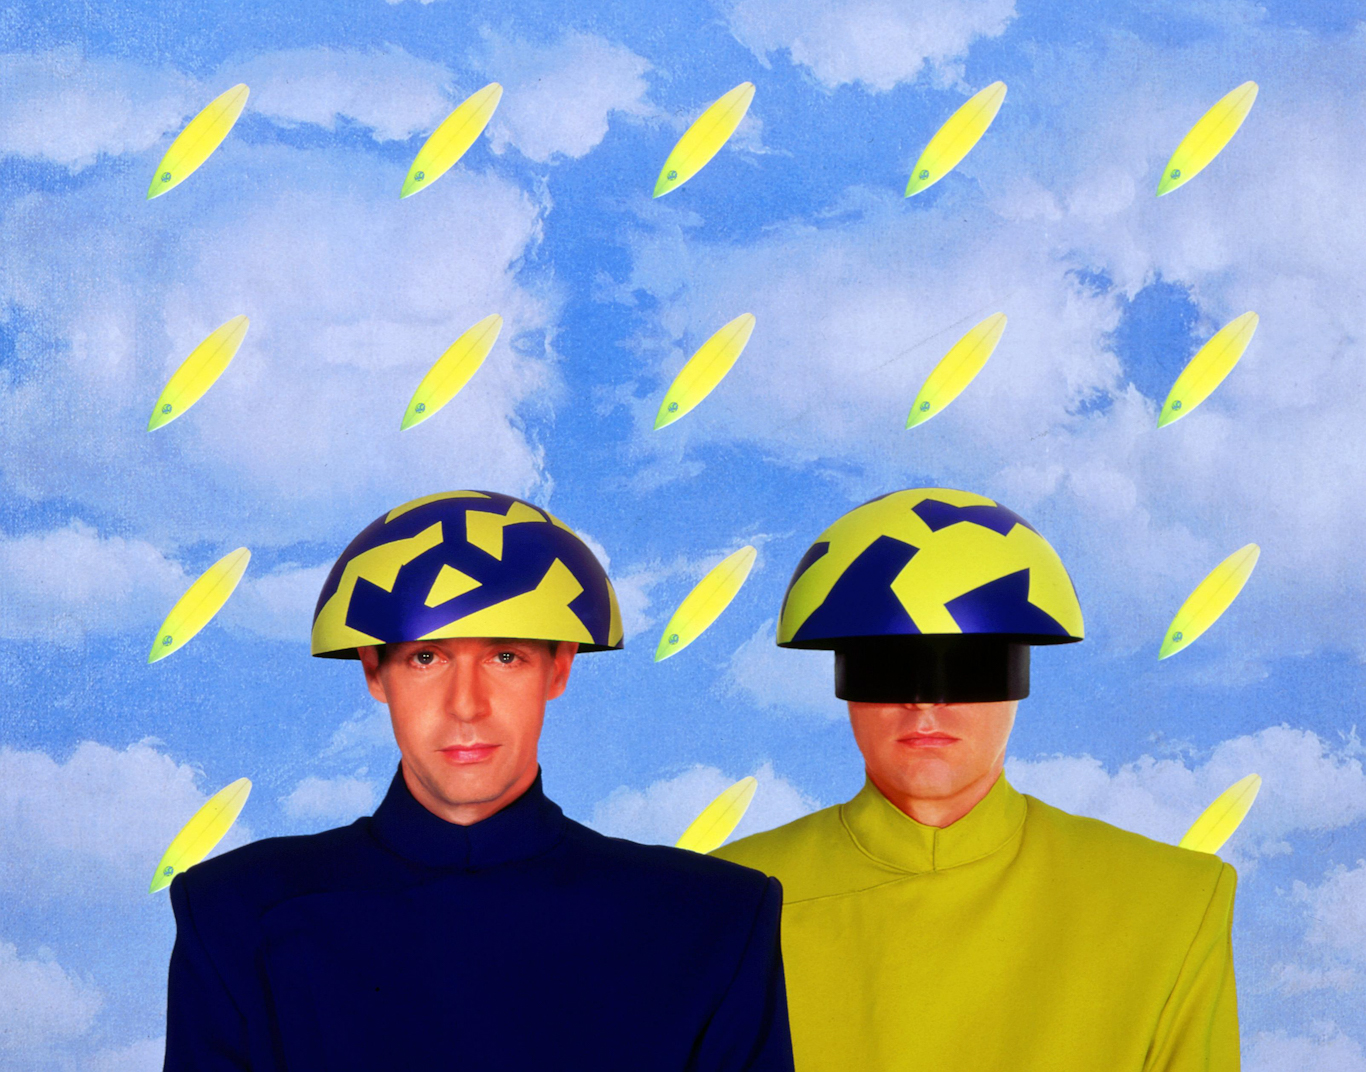 Pet Shop Boys Release 10-Minute Orchestral Song 'Cricket Wife